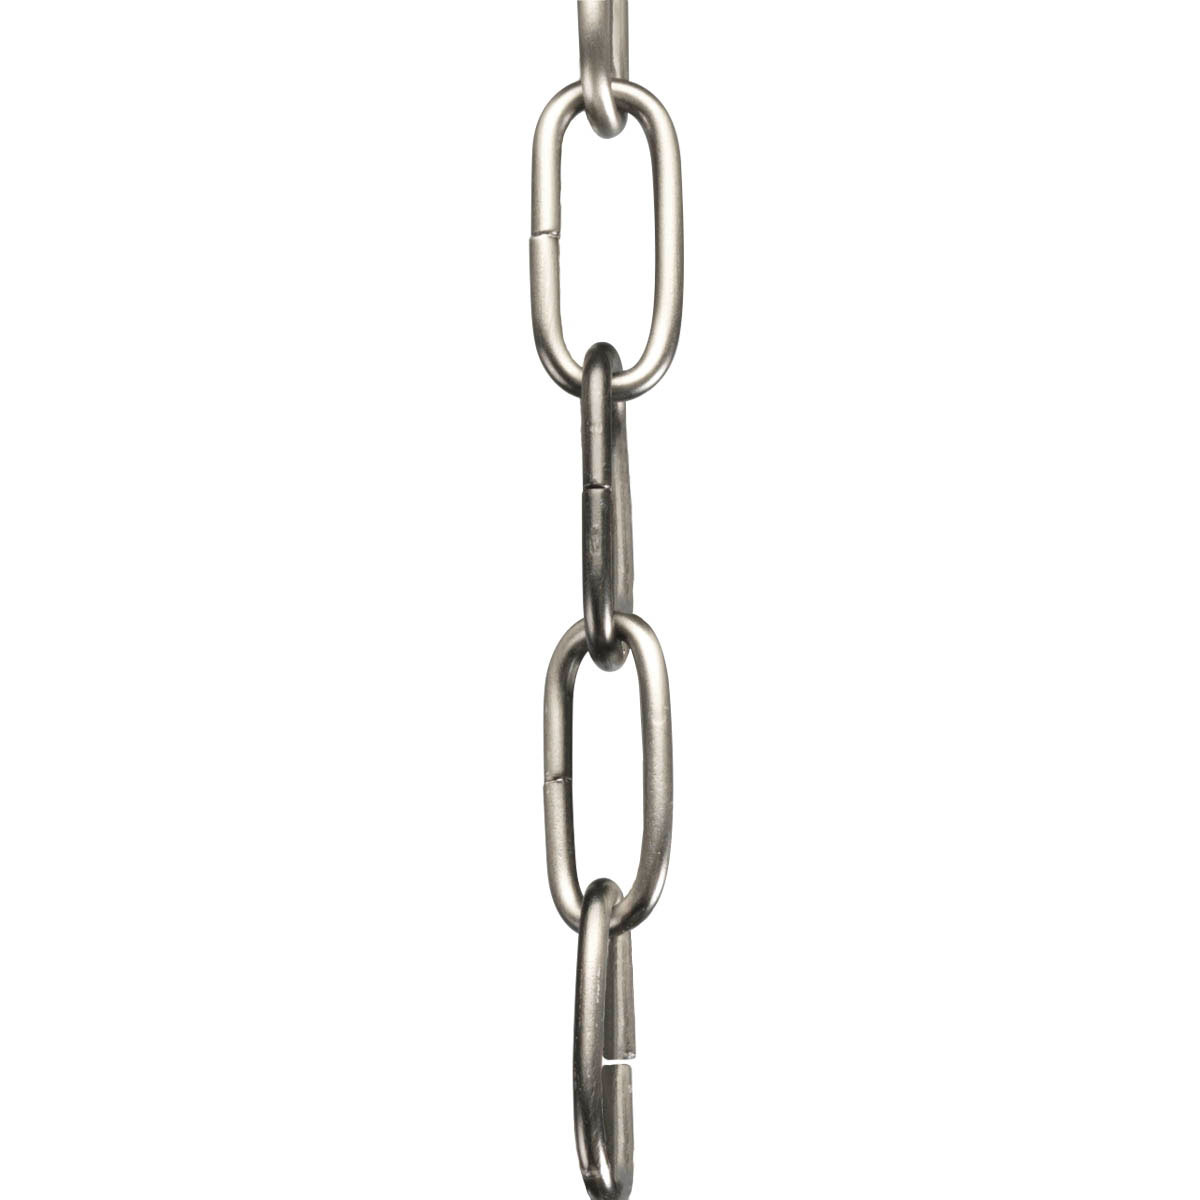 Ten feet of 9 gauge chain in Antique Nickel finish. Solid chain permits installation of chain-hung fixtures on high ceilings. Maximum fixture weight 50 lbs.